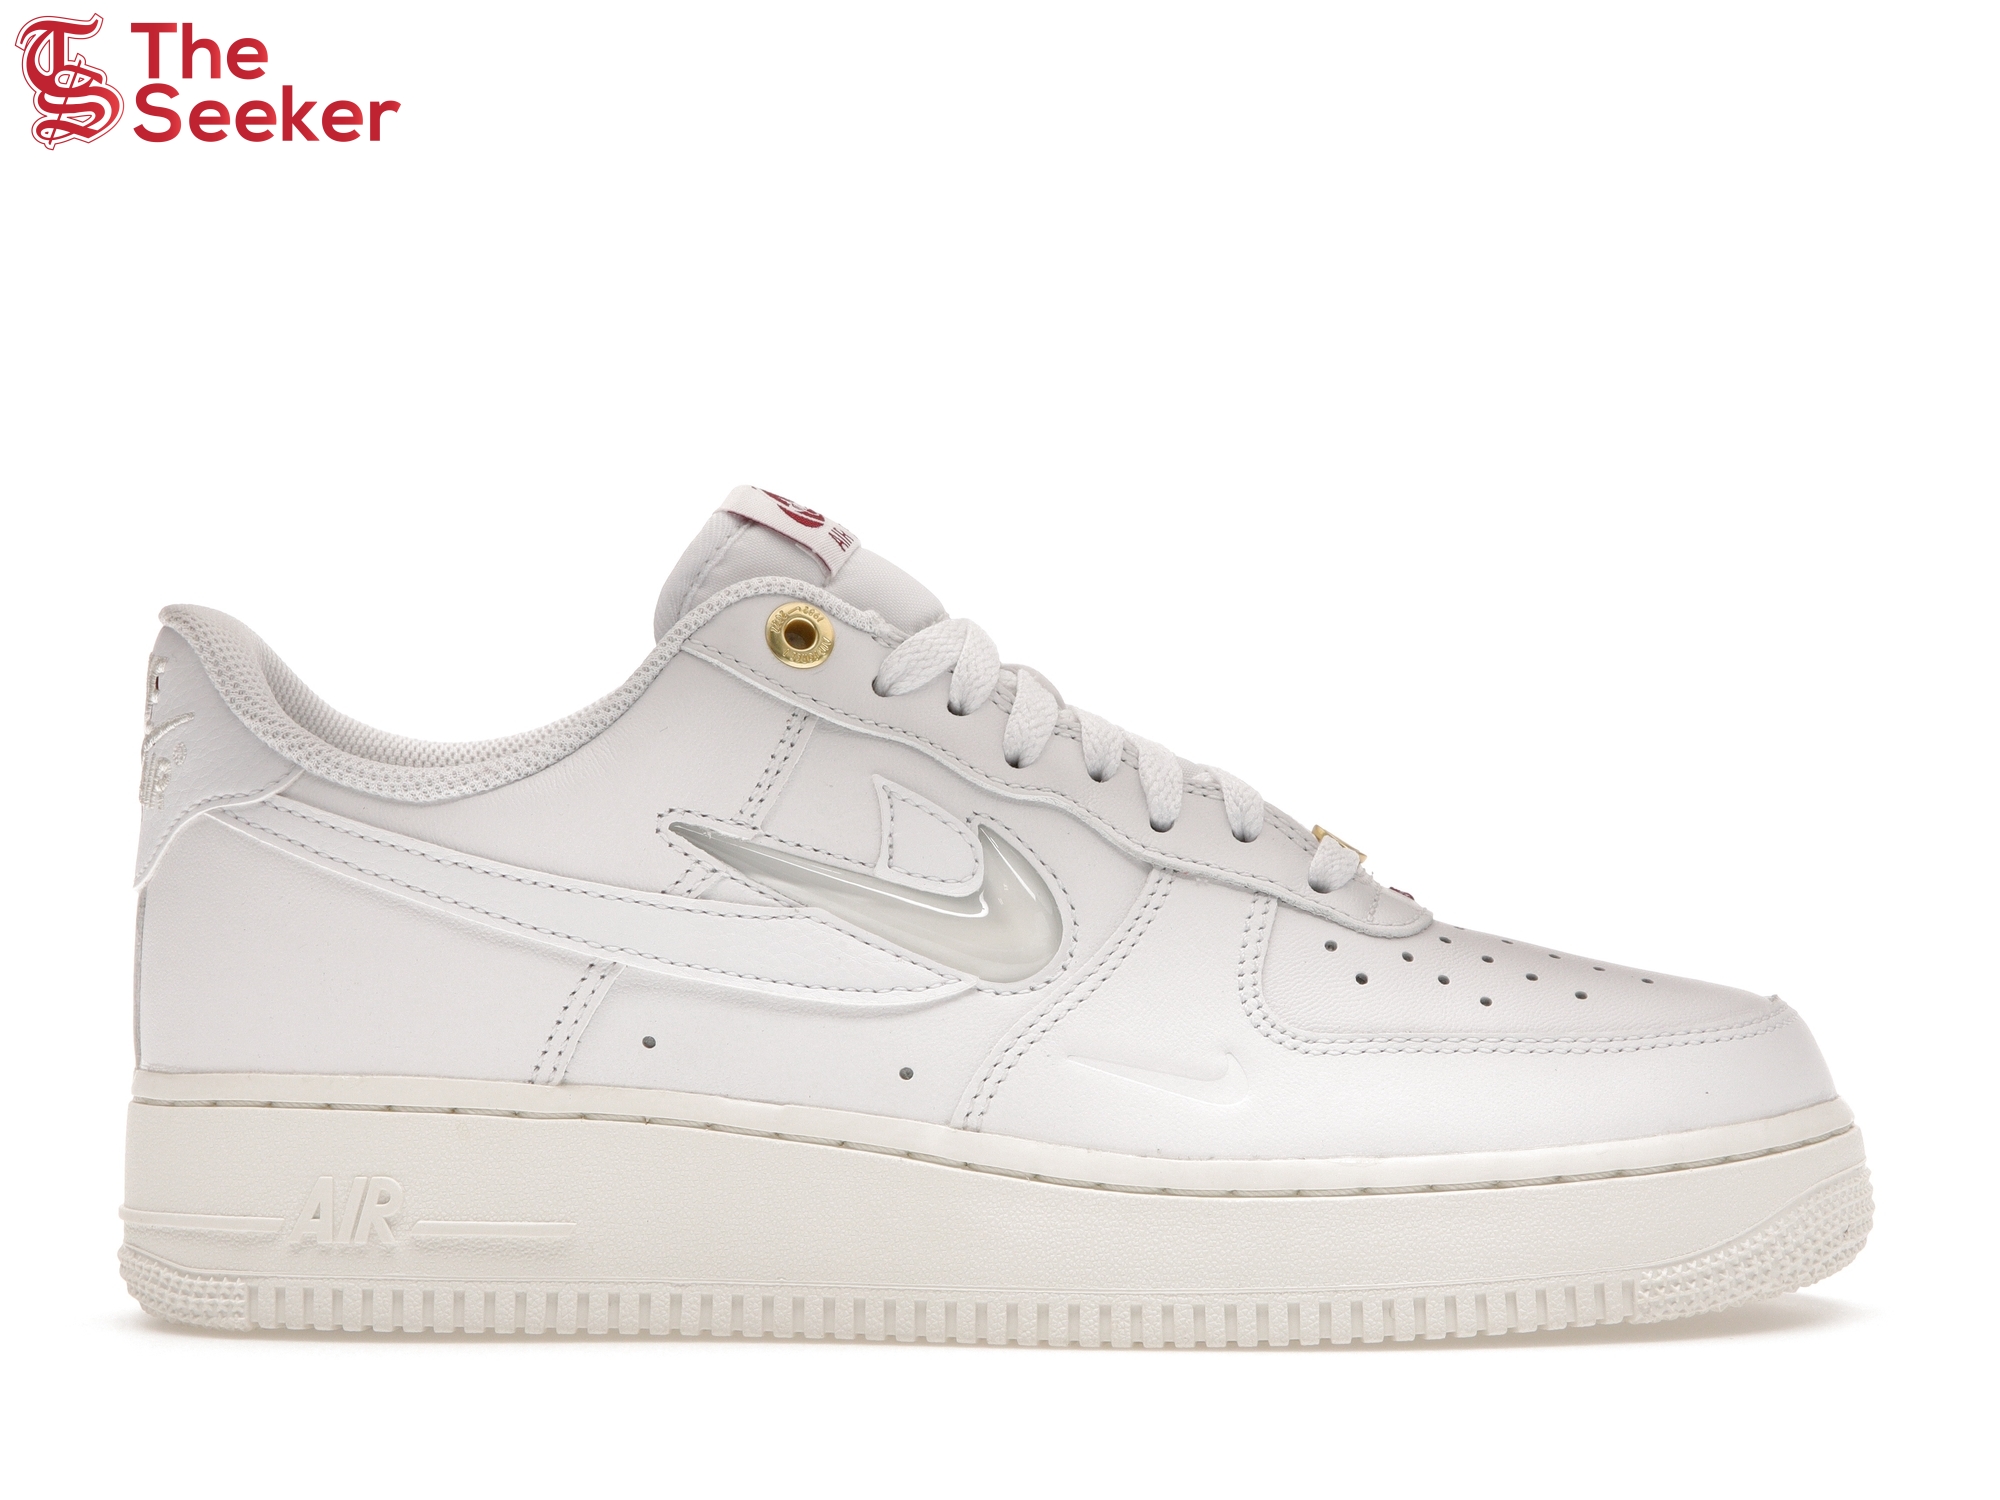 Nike Air Force 1 Low '07 LV8 Join Forces Sail